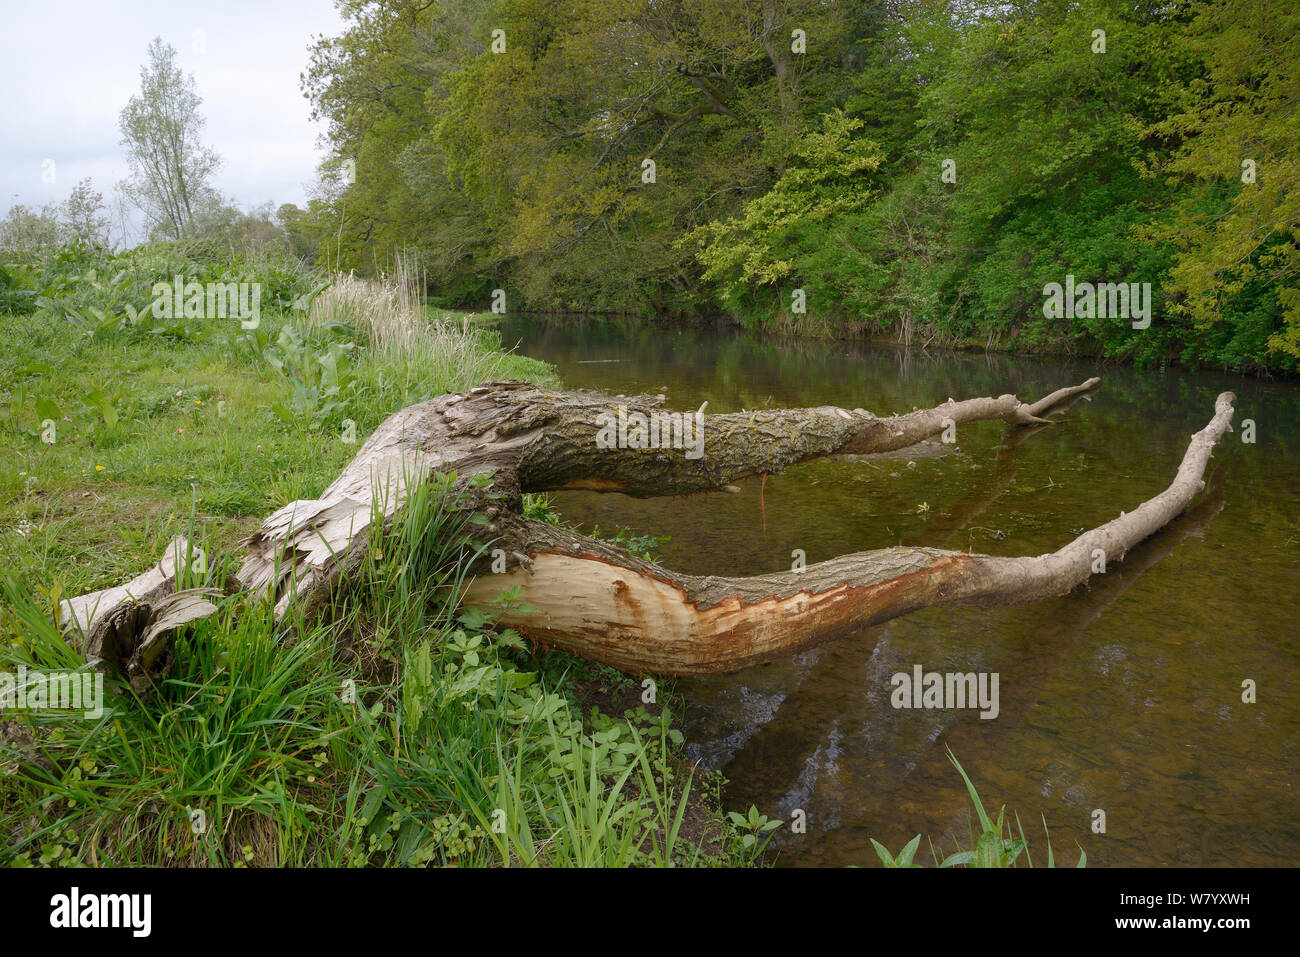 Willow tree (Salix sp.) felled and most of its bark stripped off by Eurasian beavers (Castor fiber) on the banks of the River Otter, Devon, UK, May. Stock Photo